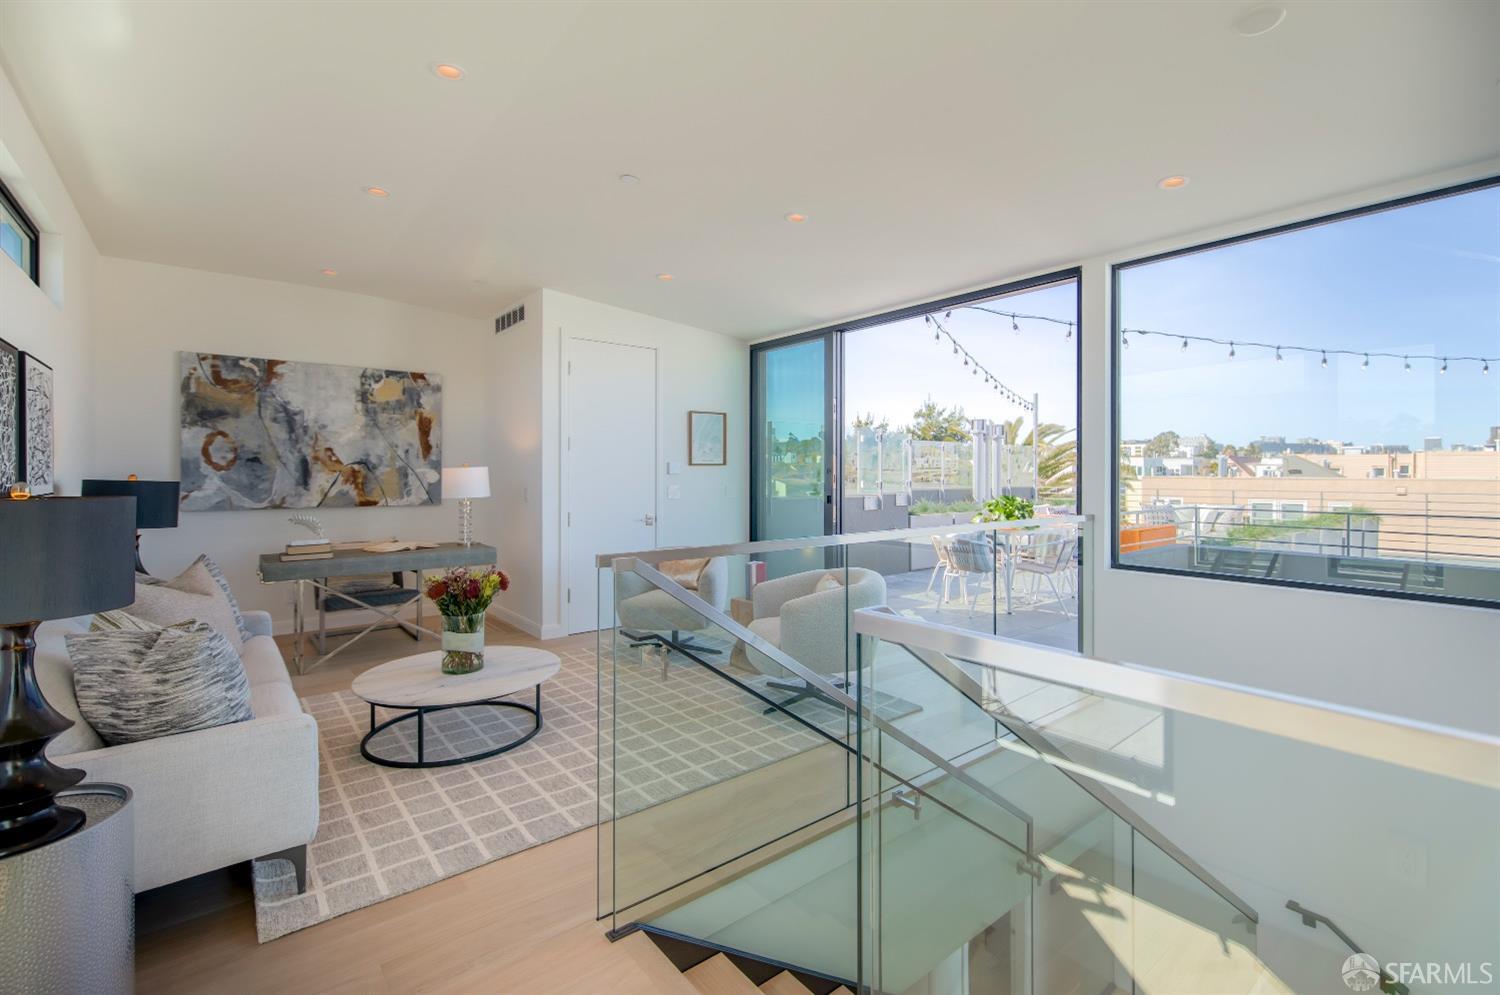 3562 18th Street, San Francisco, California, 94110, United States, 2 Bedrooms Bedrooms, ,2 BathroomsBathrooms,Residential,For Sale,3562 18th Street,1486164